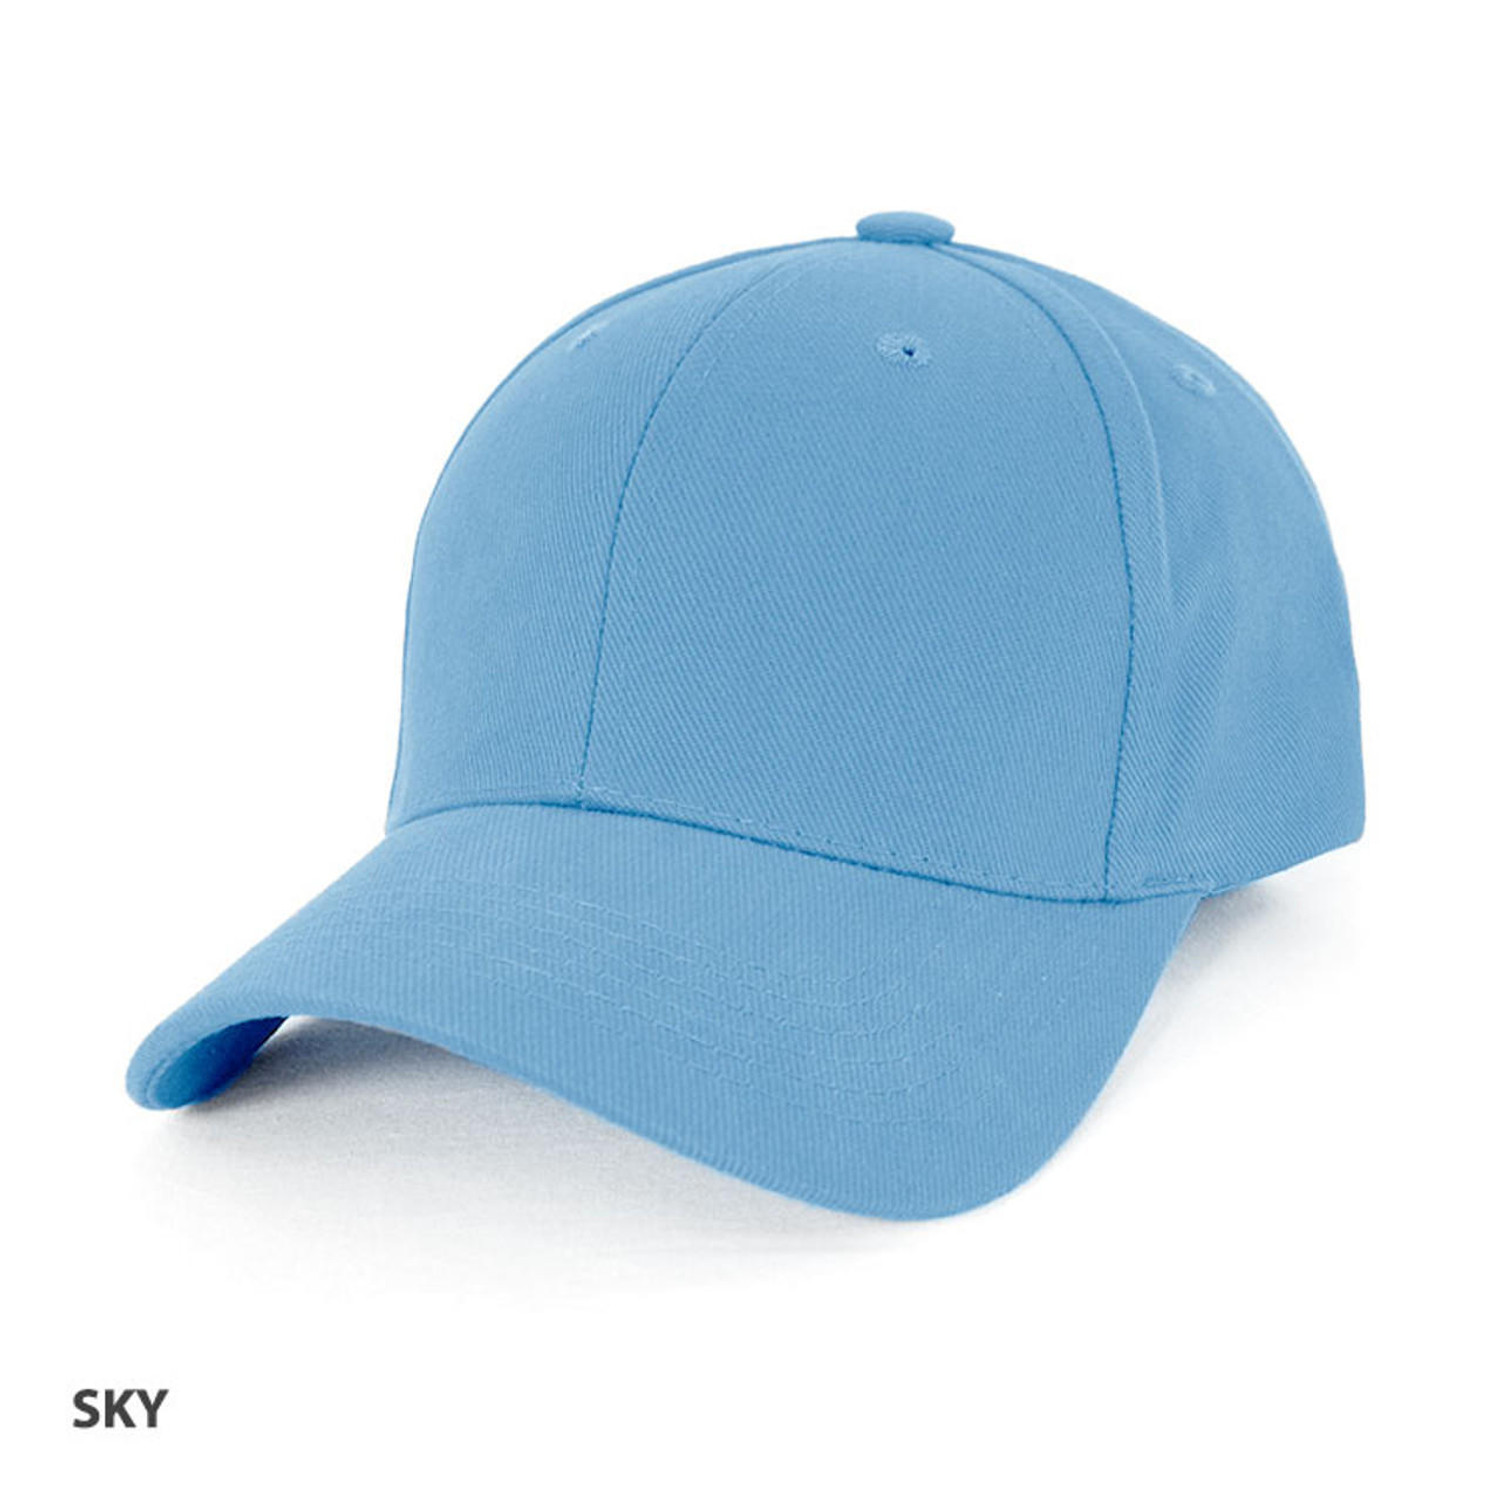  FREE EMBROIDERY - Heavy Brushed Cotton Cap in Sky (Buy 20+) 